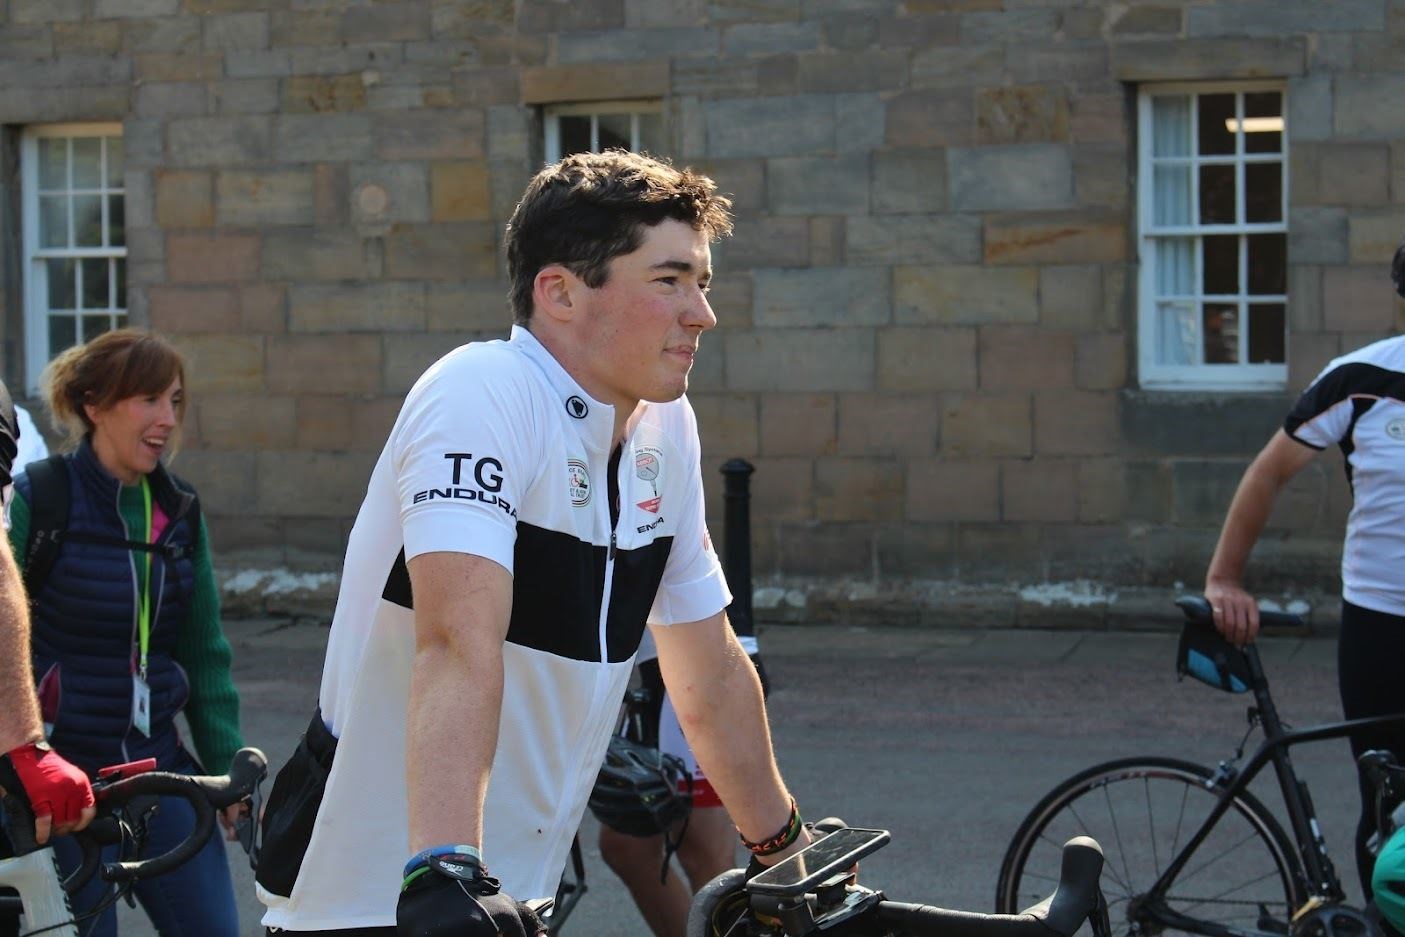 Timothy was welcomed by students, teachers and support staff after arriving at Gordonstoun.